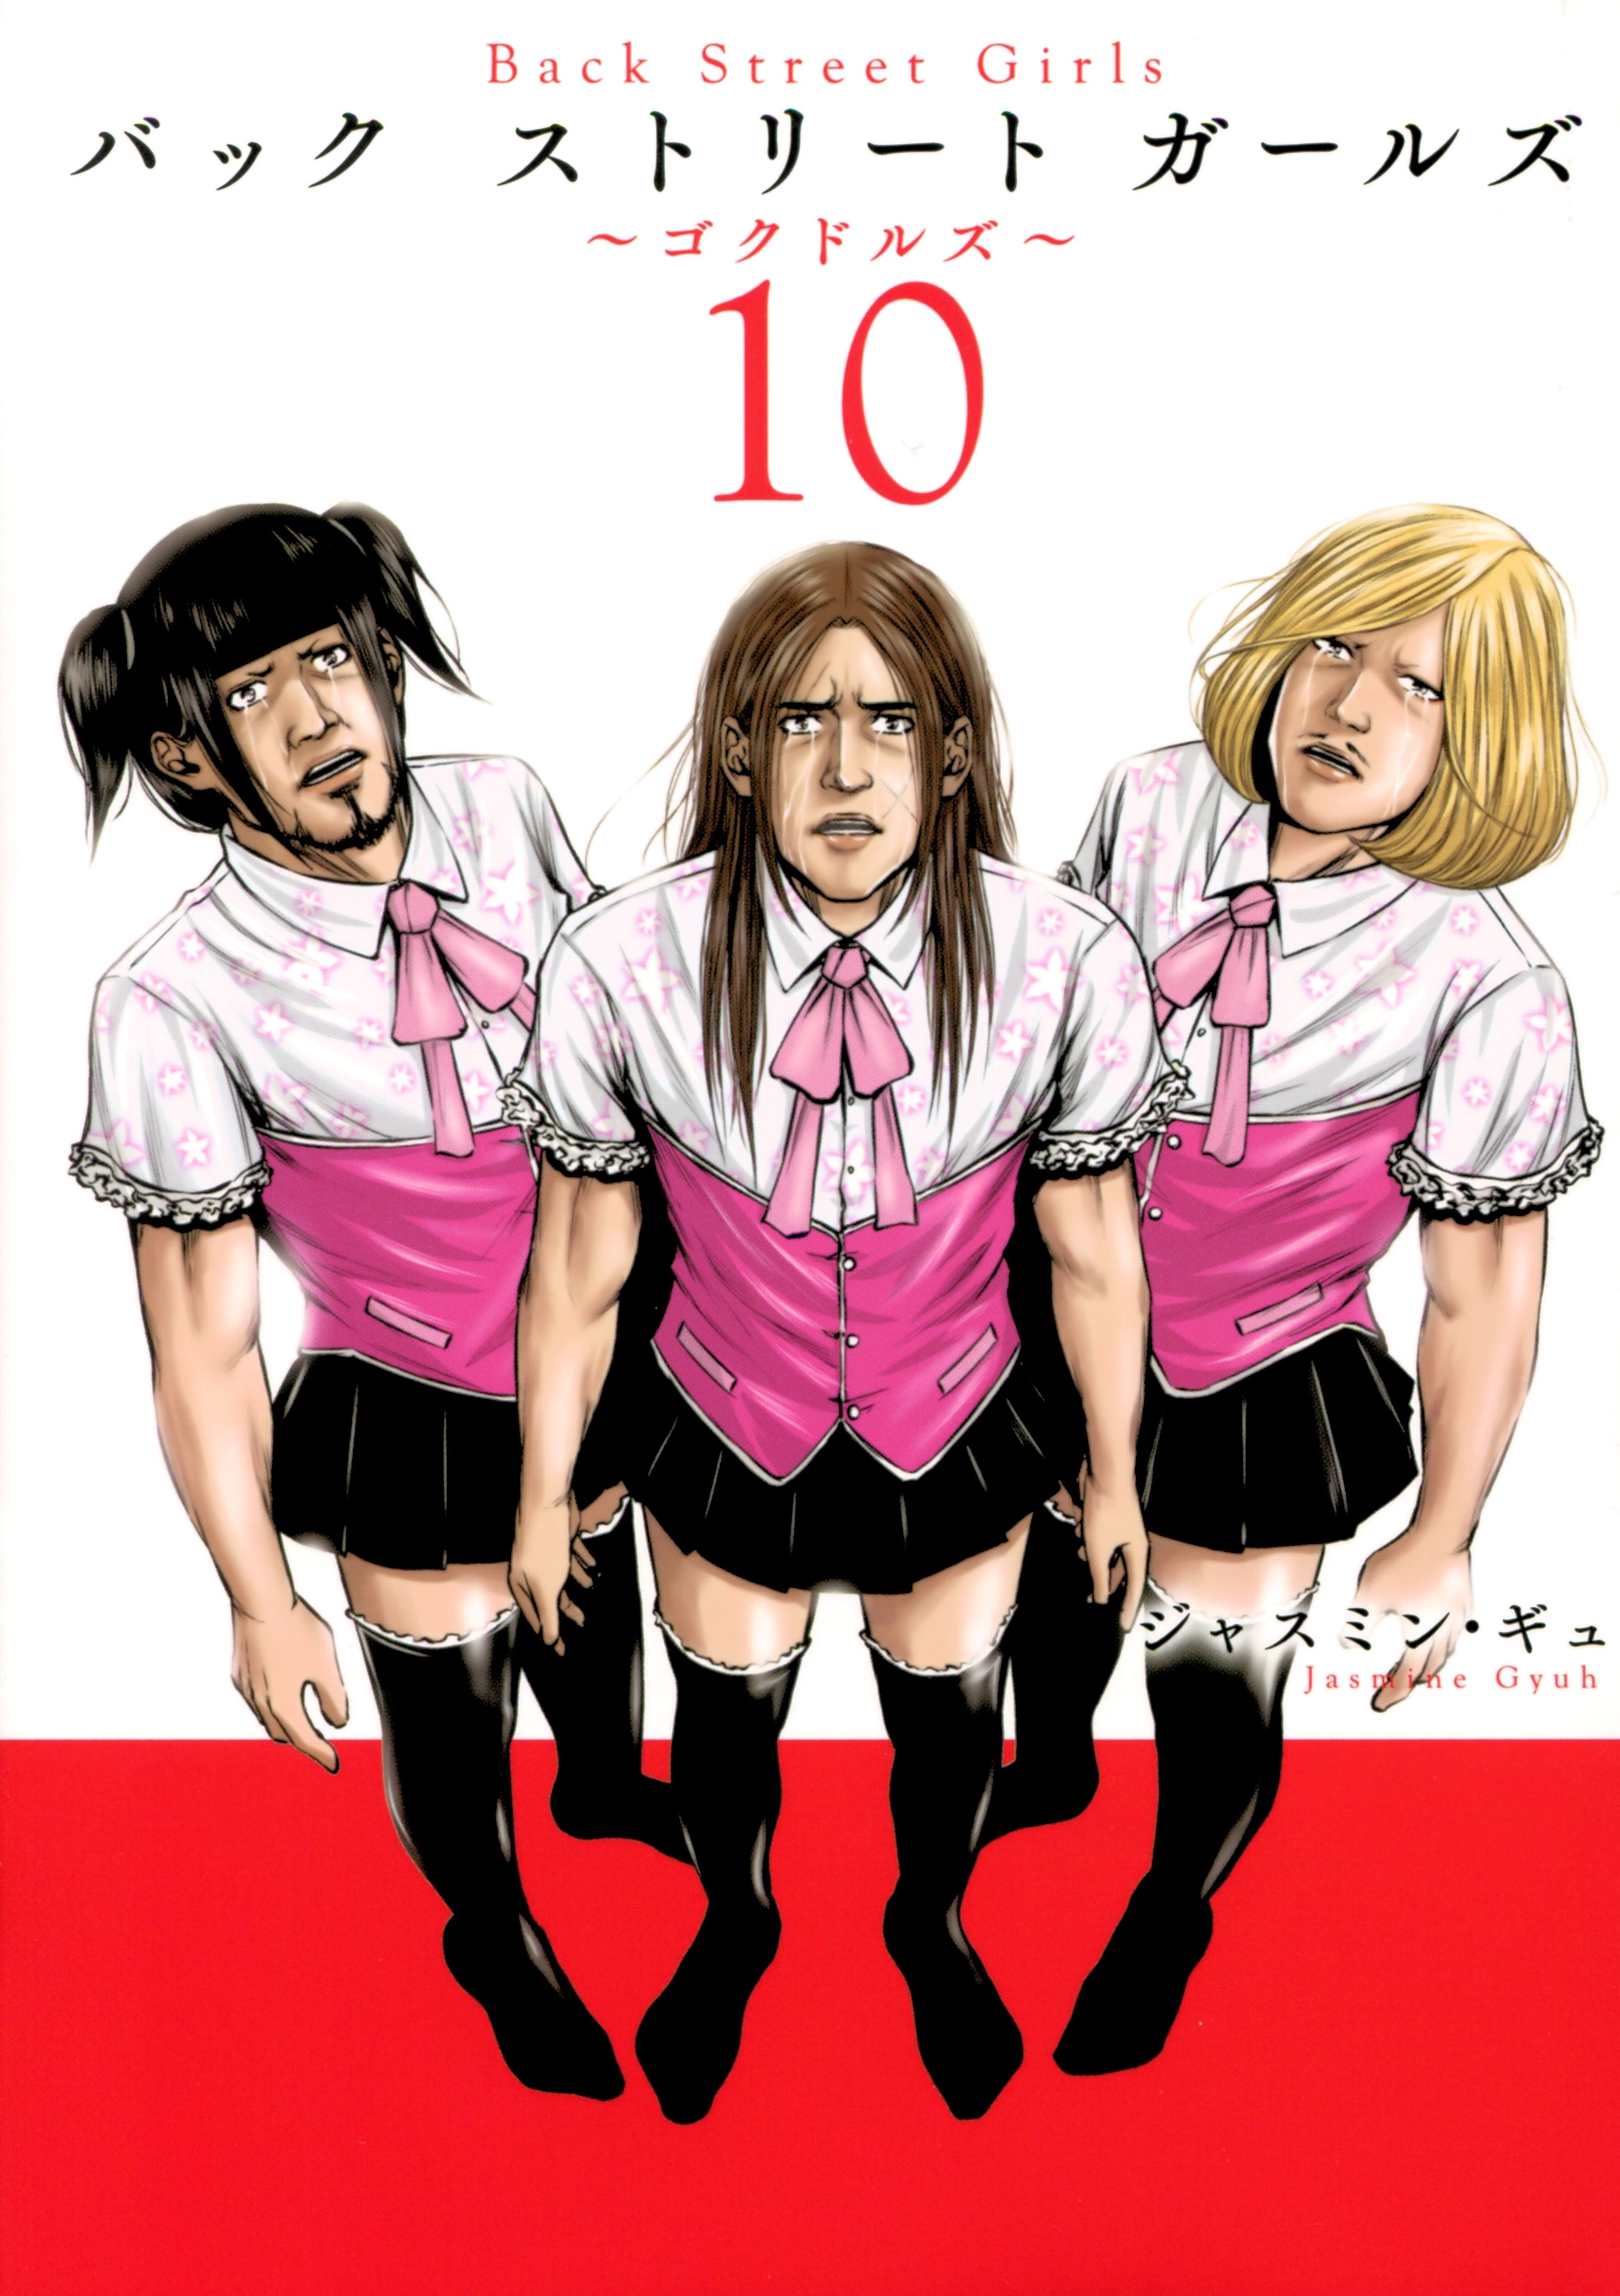 Back Street Girls and Scan Gallery